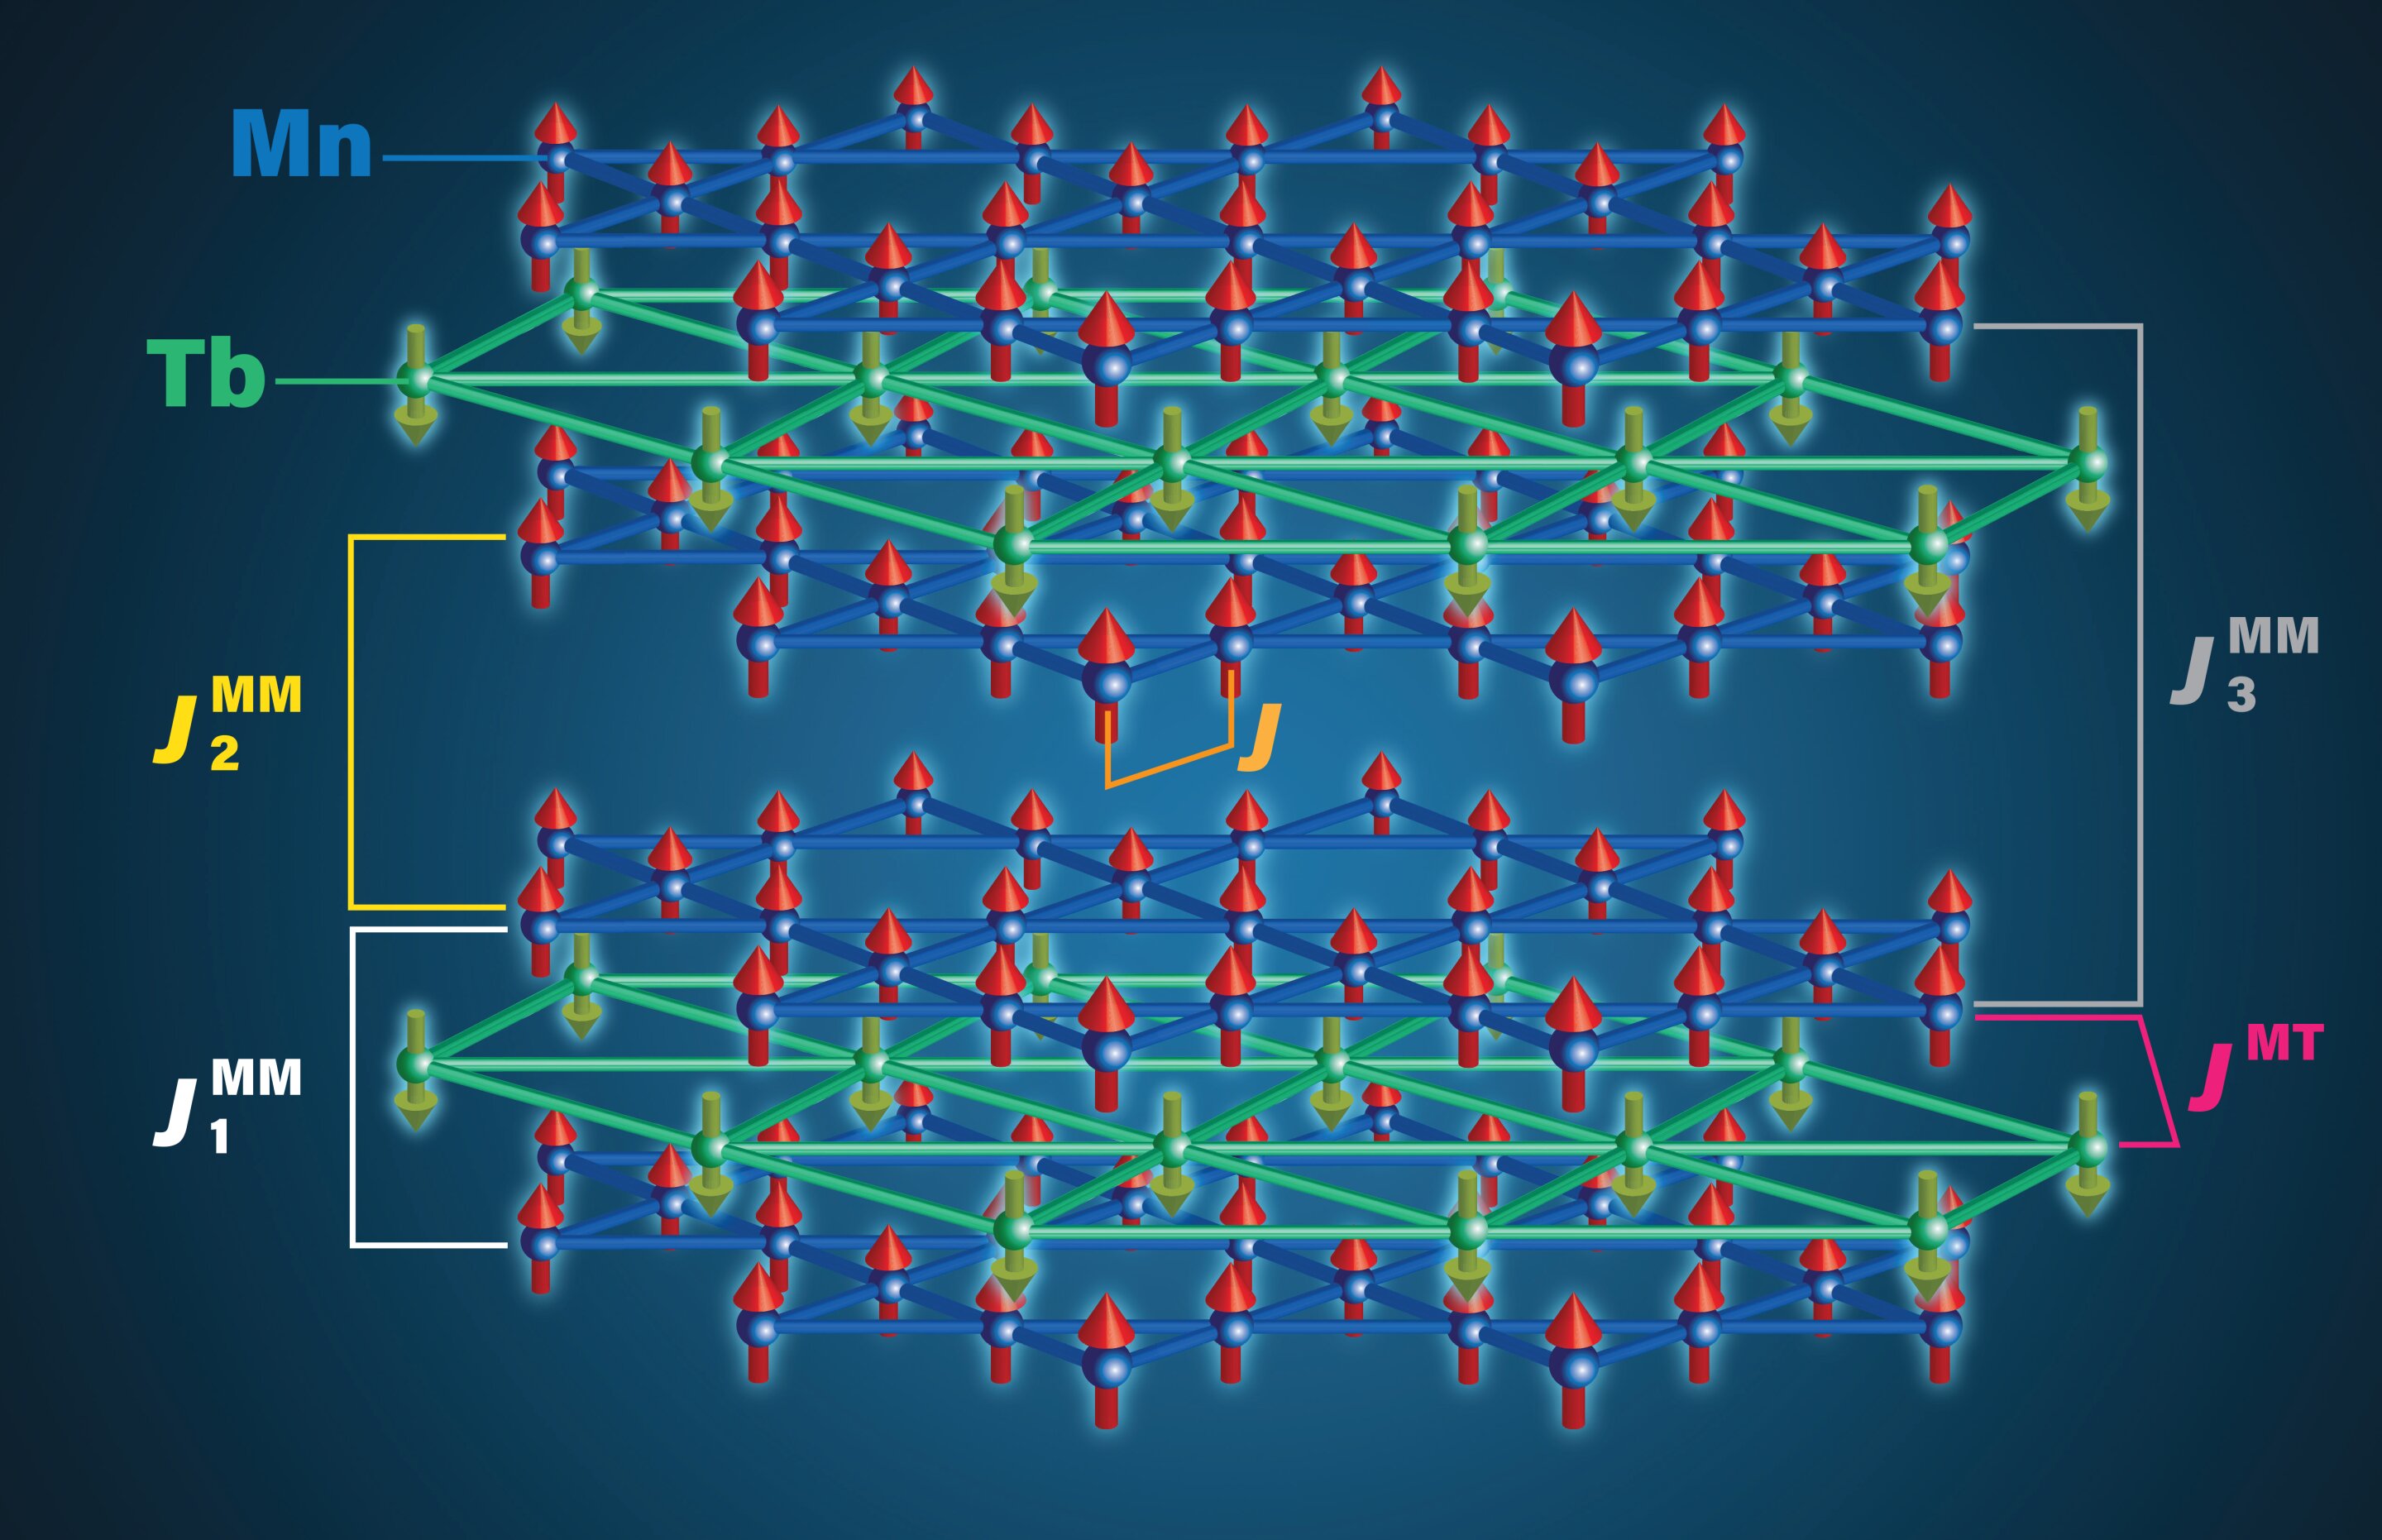 #Newly discovered magnetic interactions could lead to novel ways to manipulate electron flow